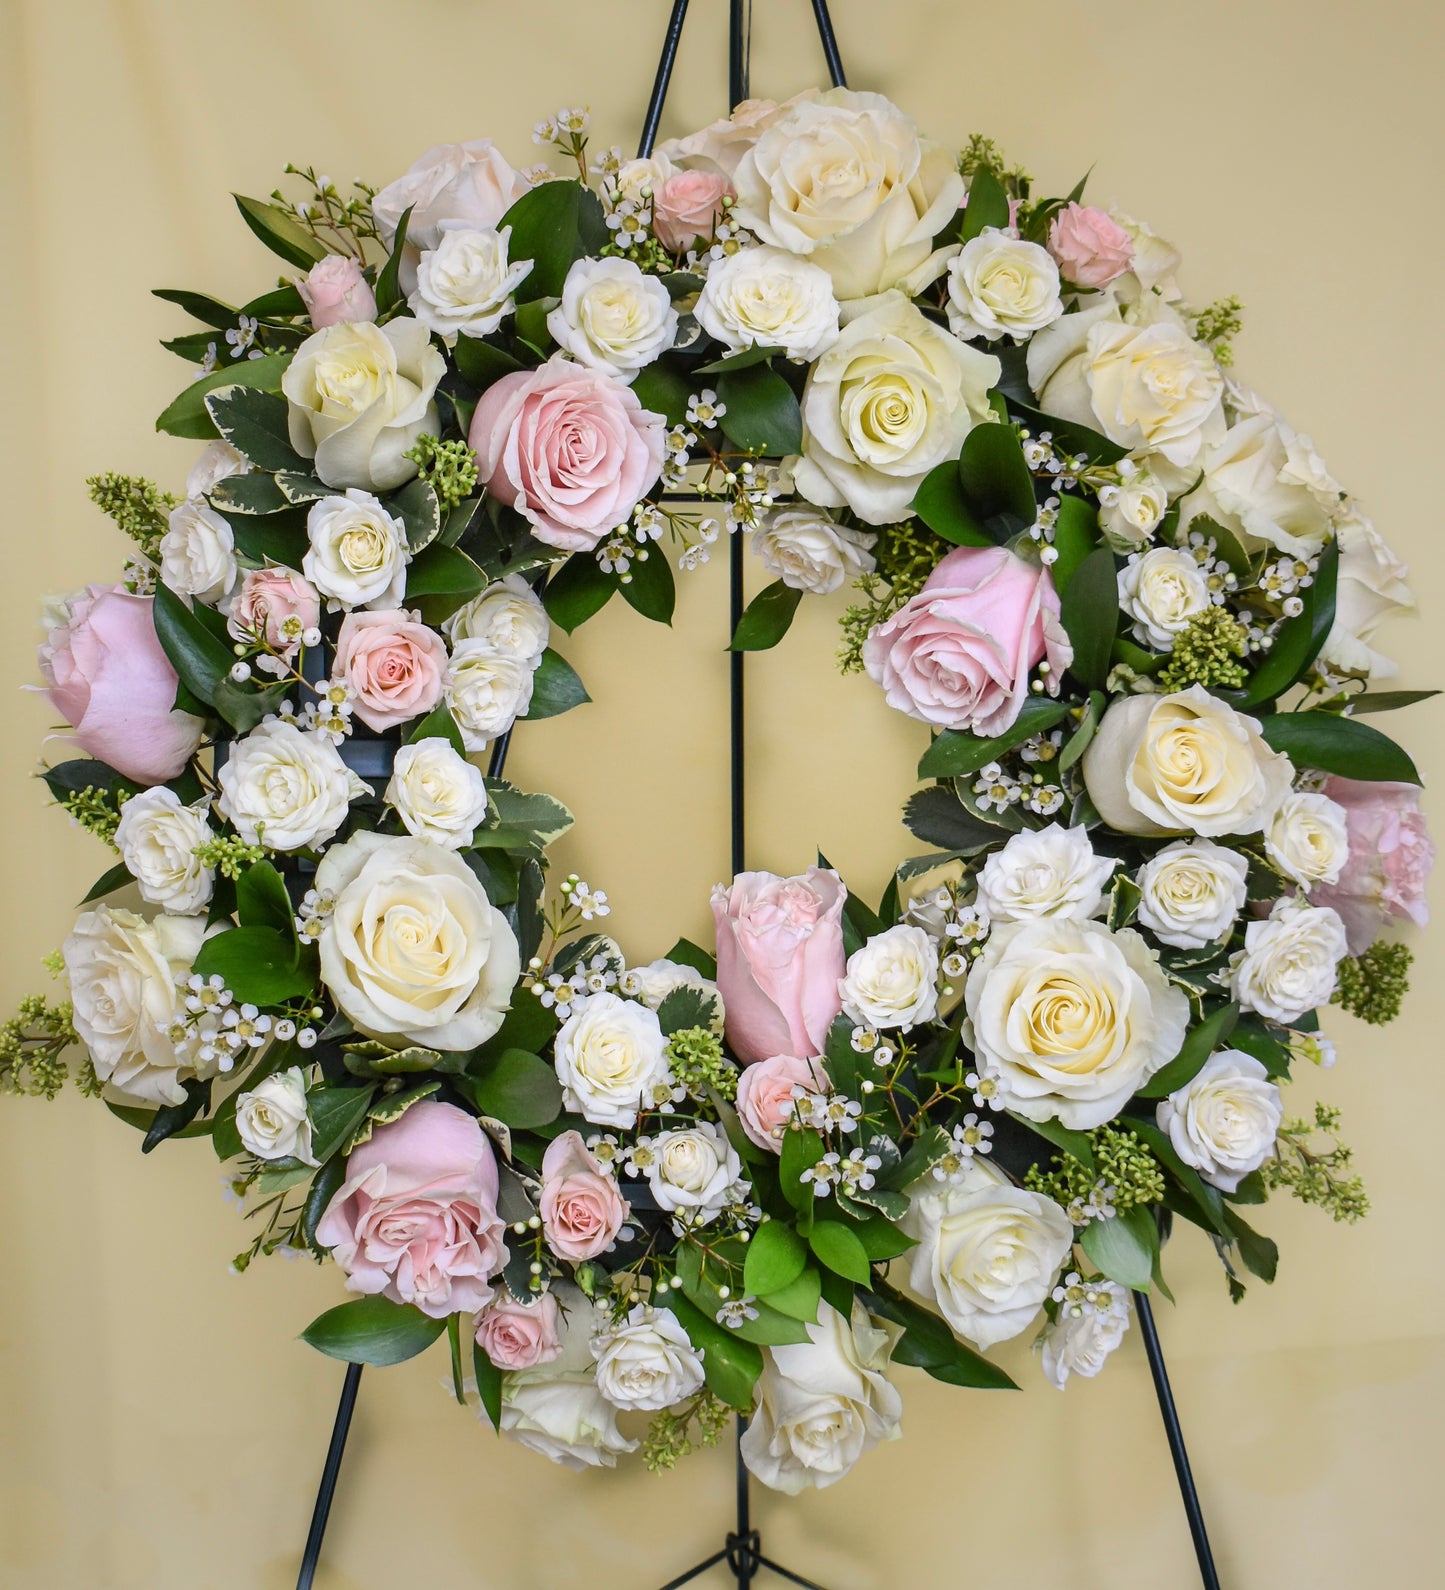 White and light pink roses and spray roses arranged in a sympathy wreath